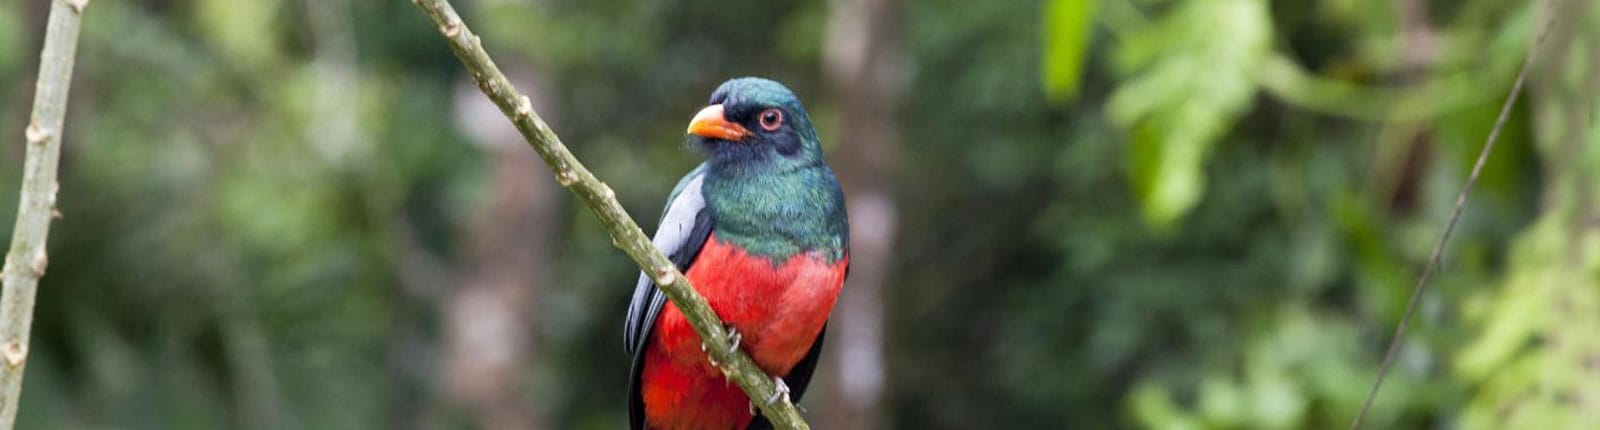 Up close with a colorful song bird in Limon, Costa Rica